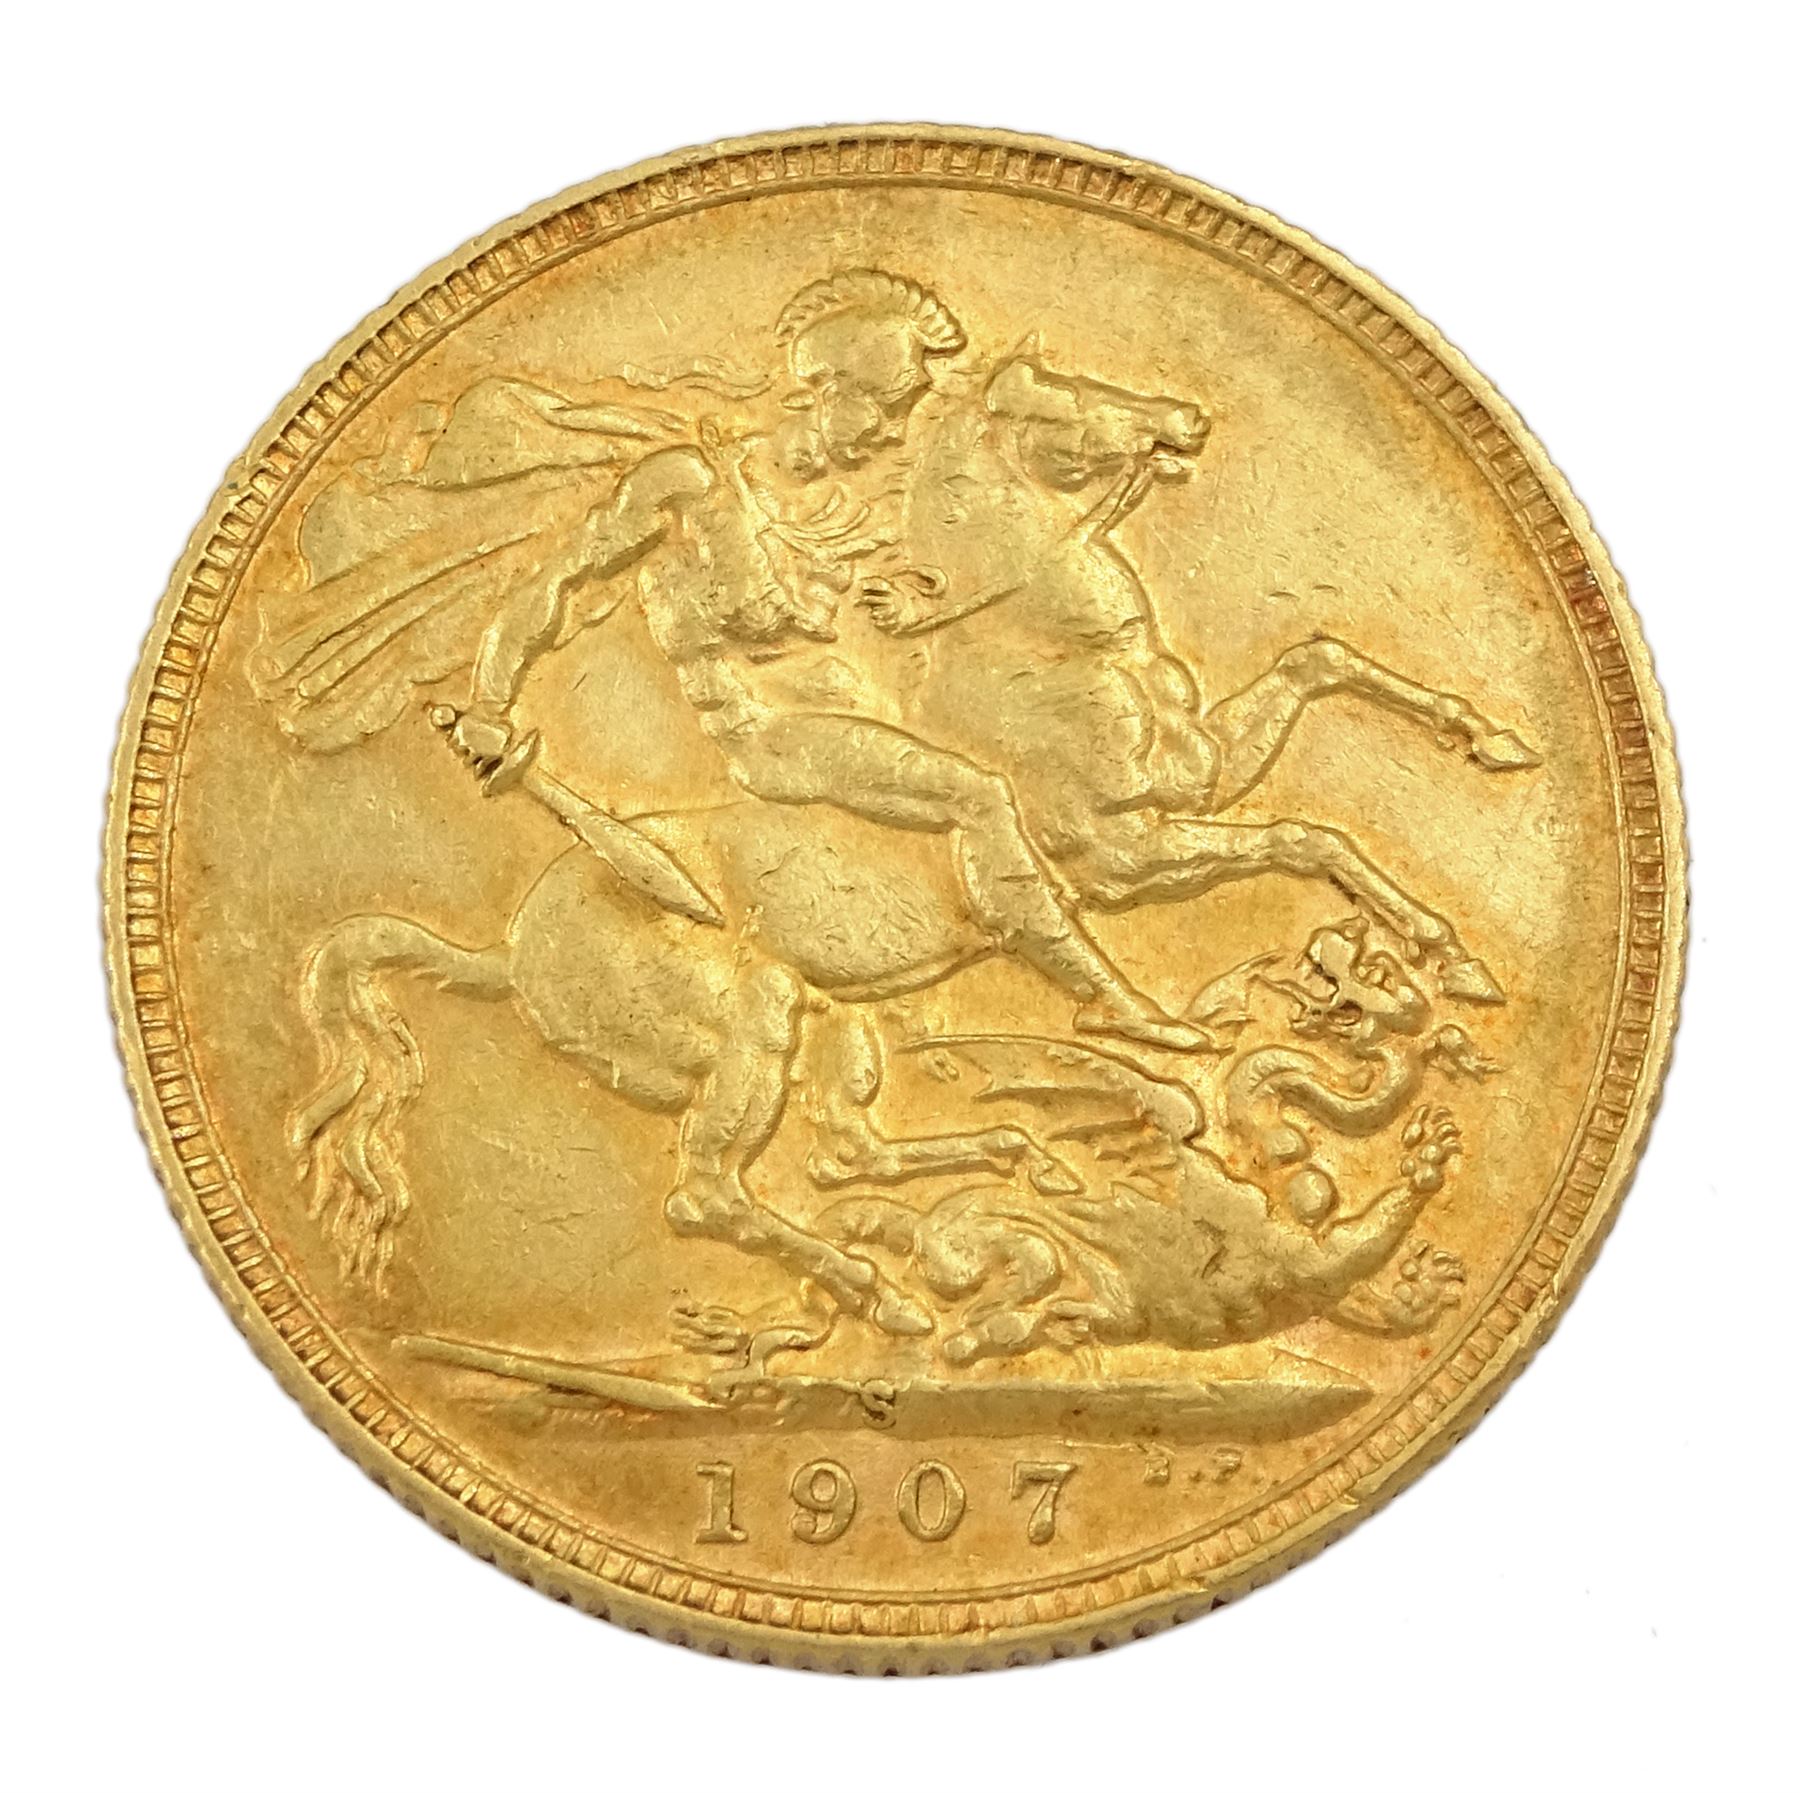 King Edward VII 1907 gold full sovereign coin - Image 2 of 2